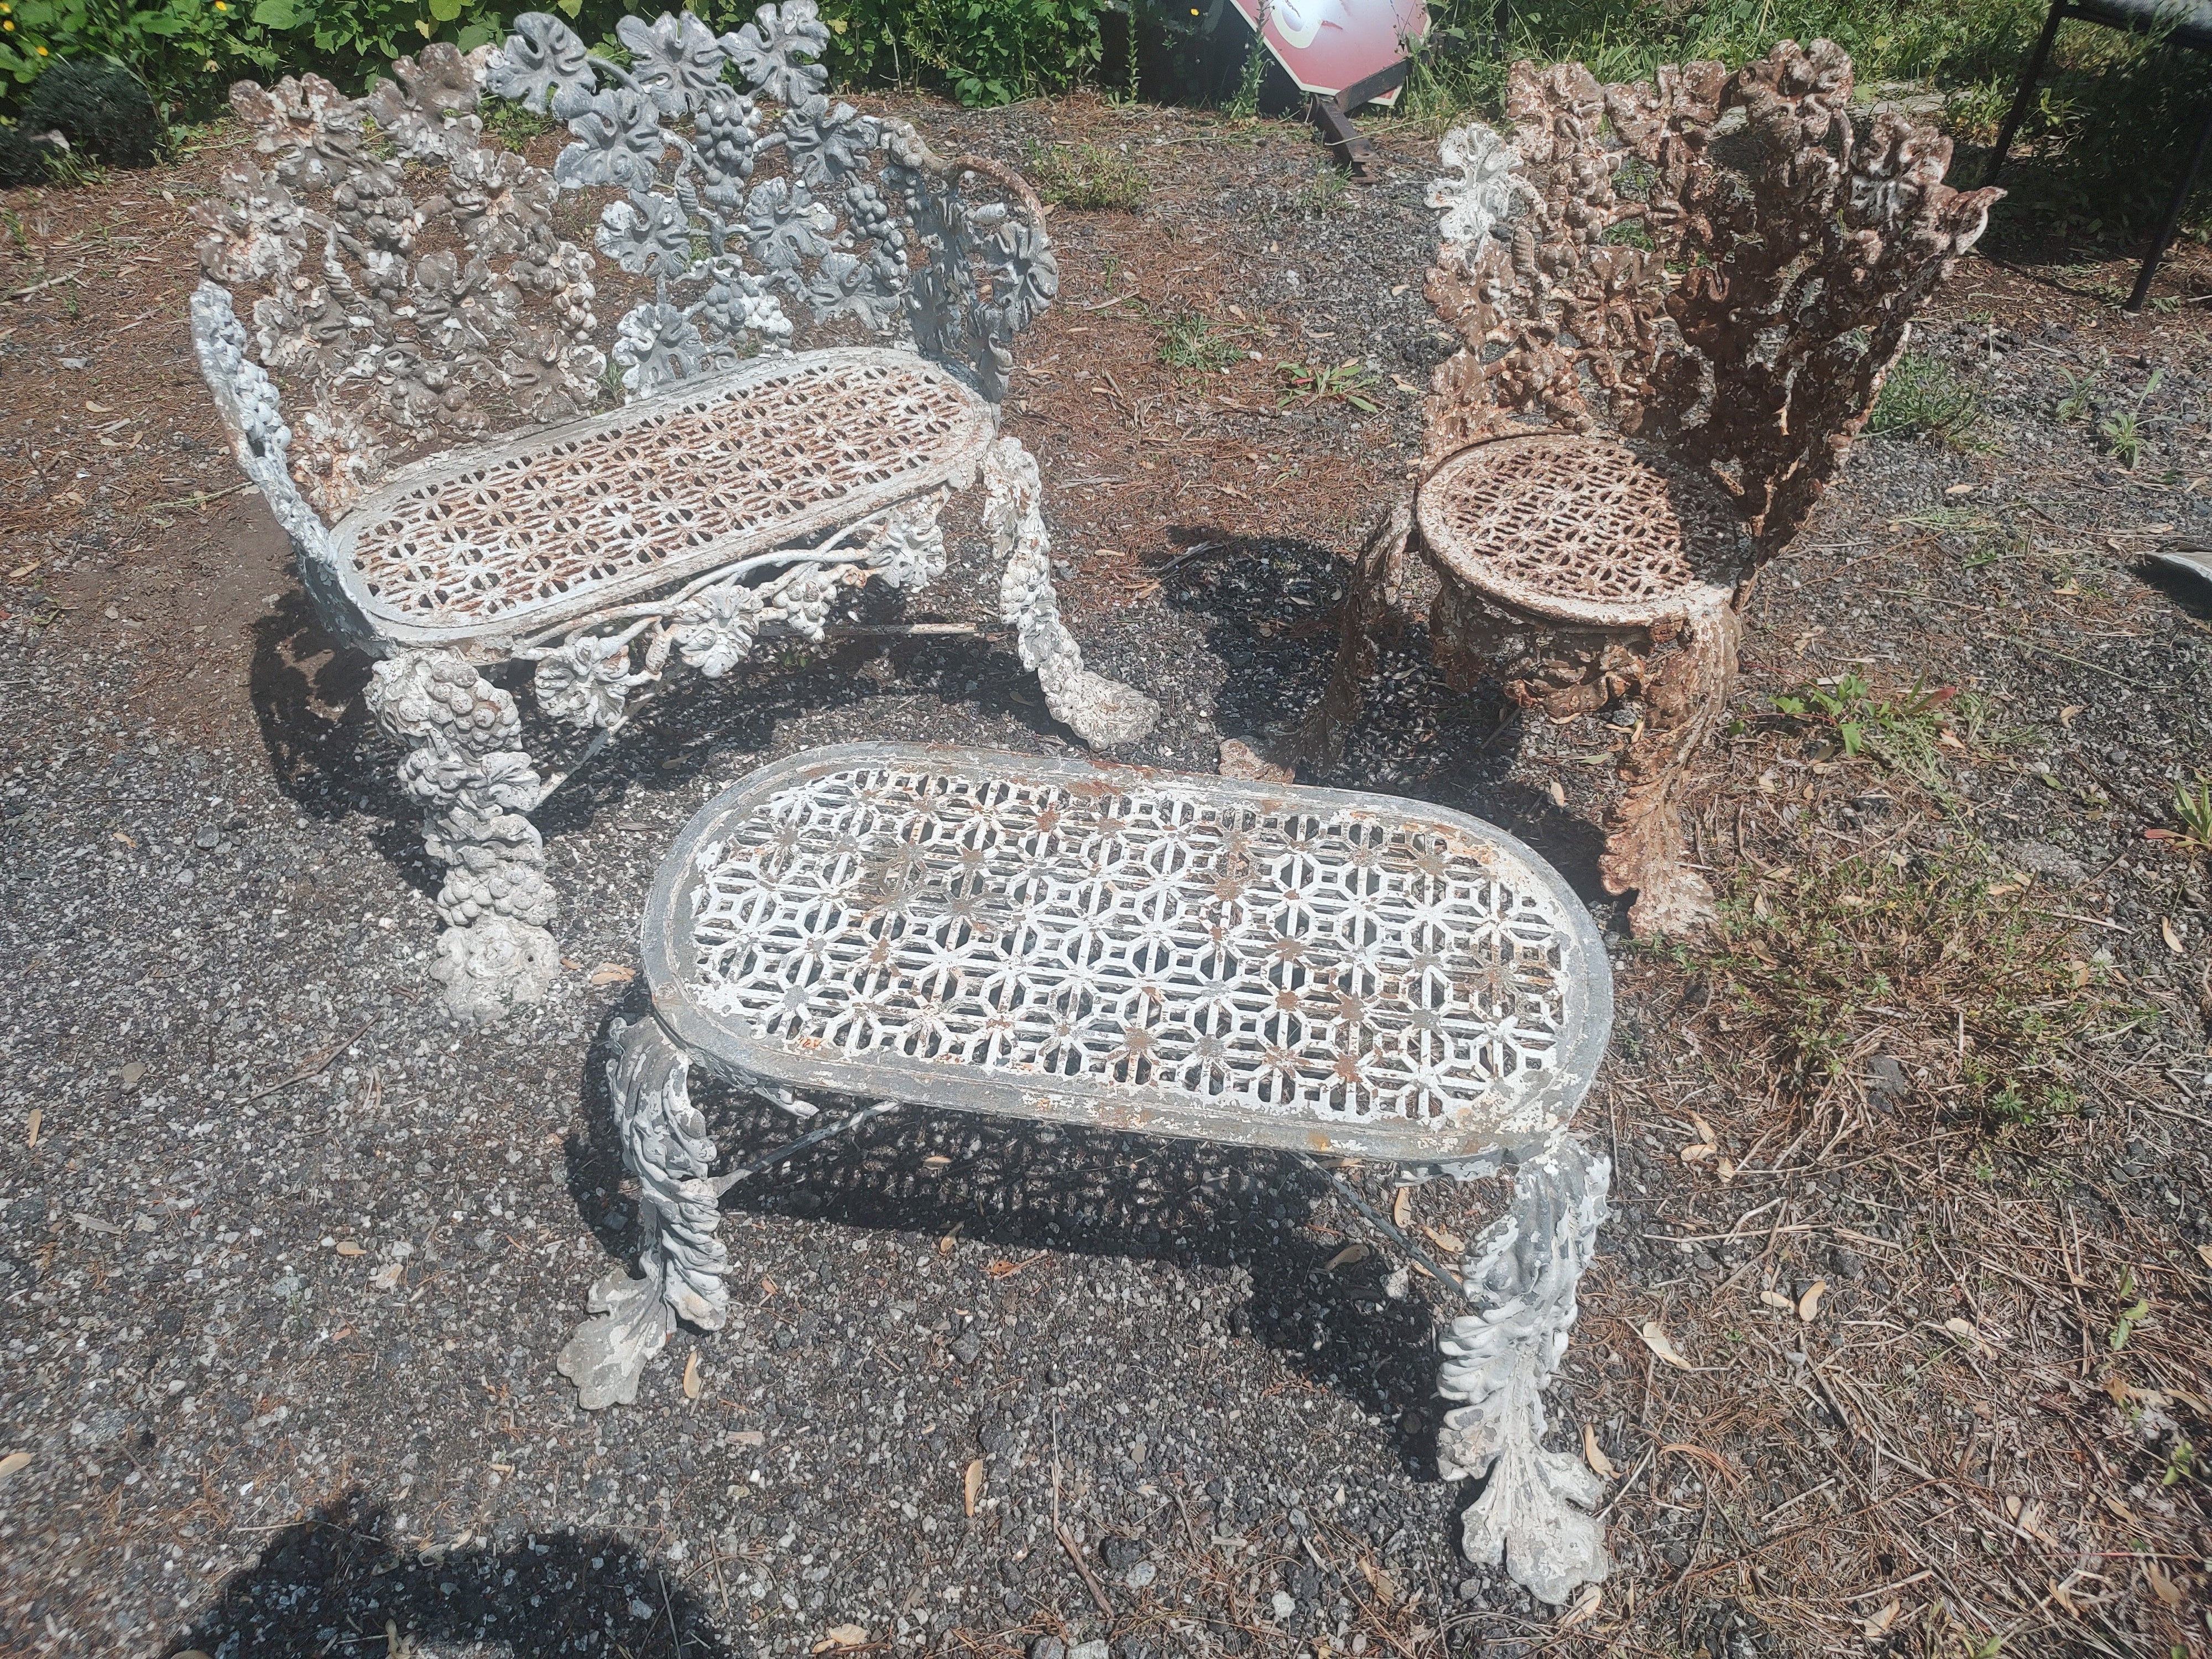 Fabulous 3 piece set of Cast Iron garden seating with table. A bench a chair and a converted bench minus it's back that can be used as a table. All three in outstanding antique condition with no visible damage or missing pieces. Very ornate with a